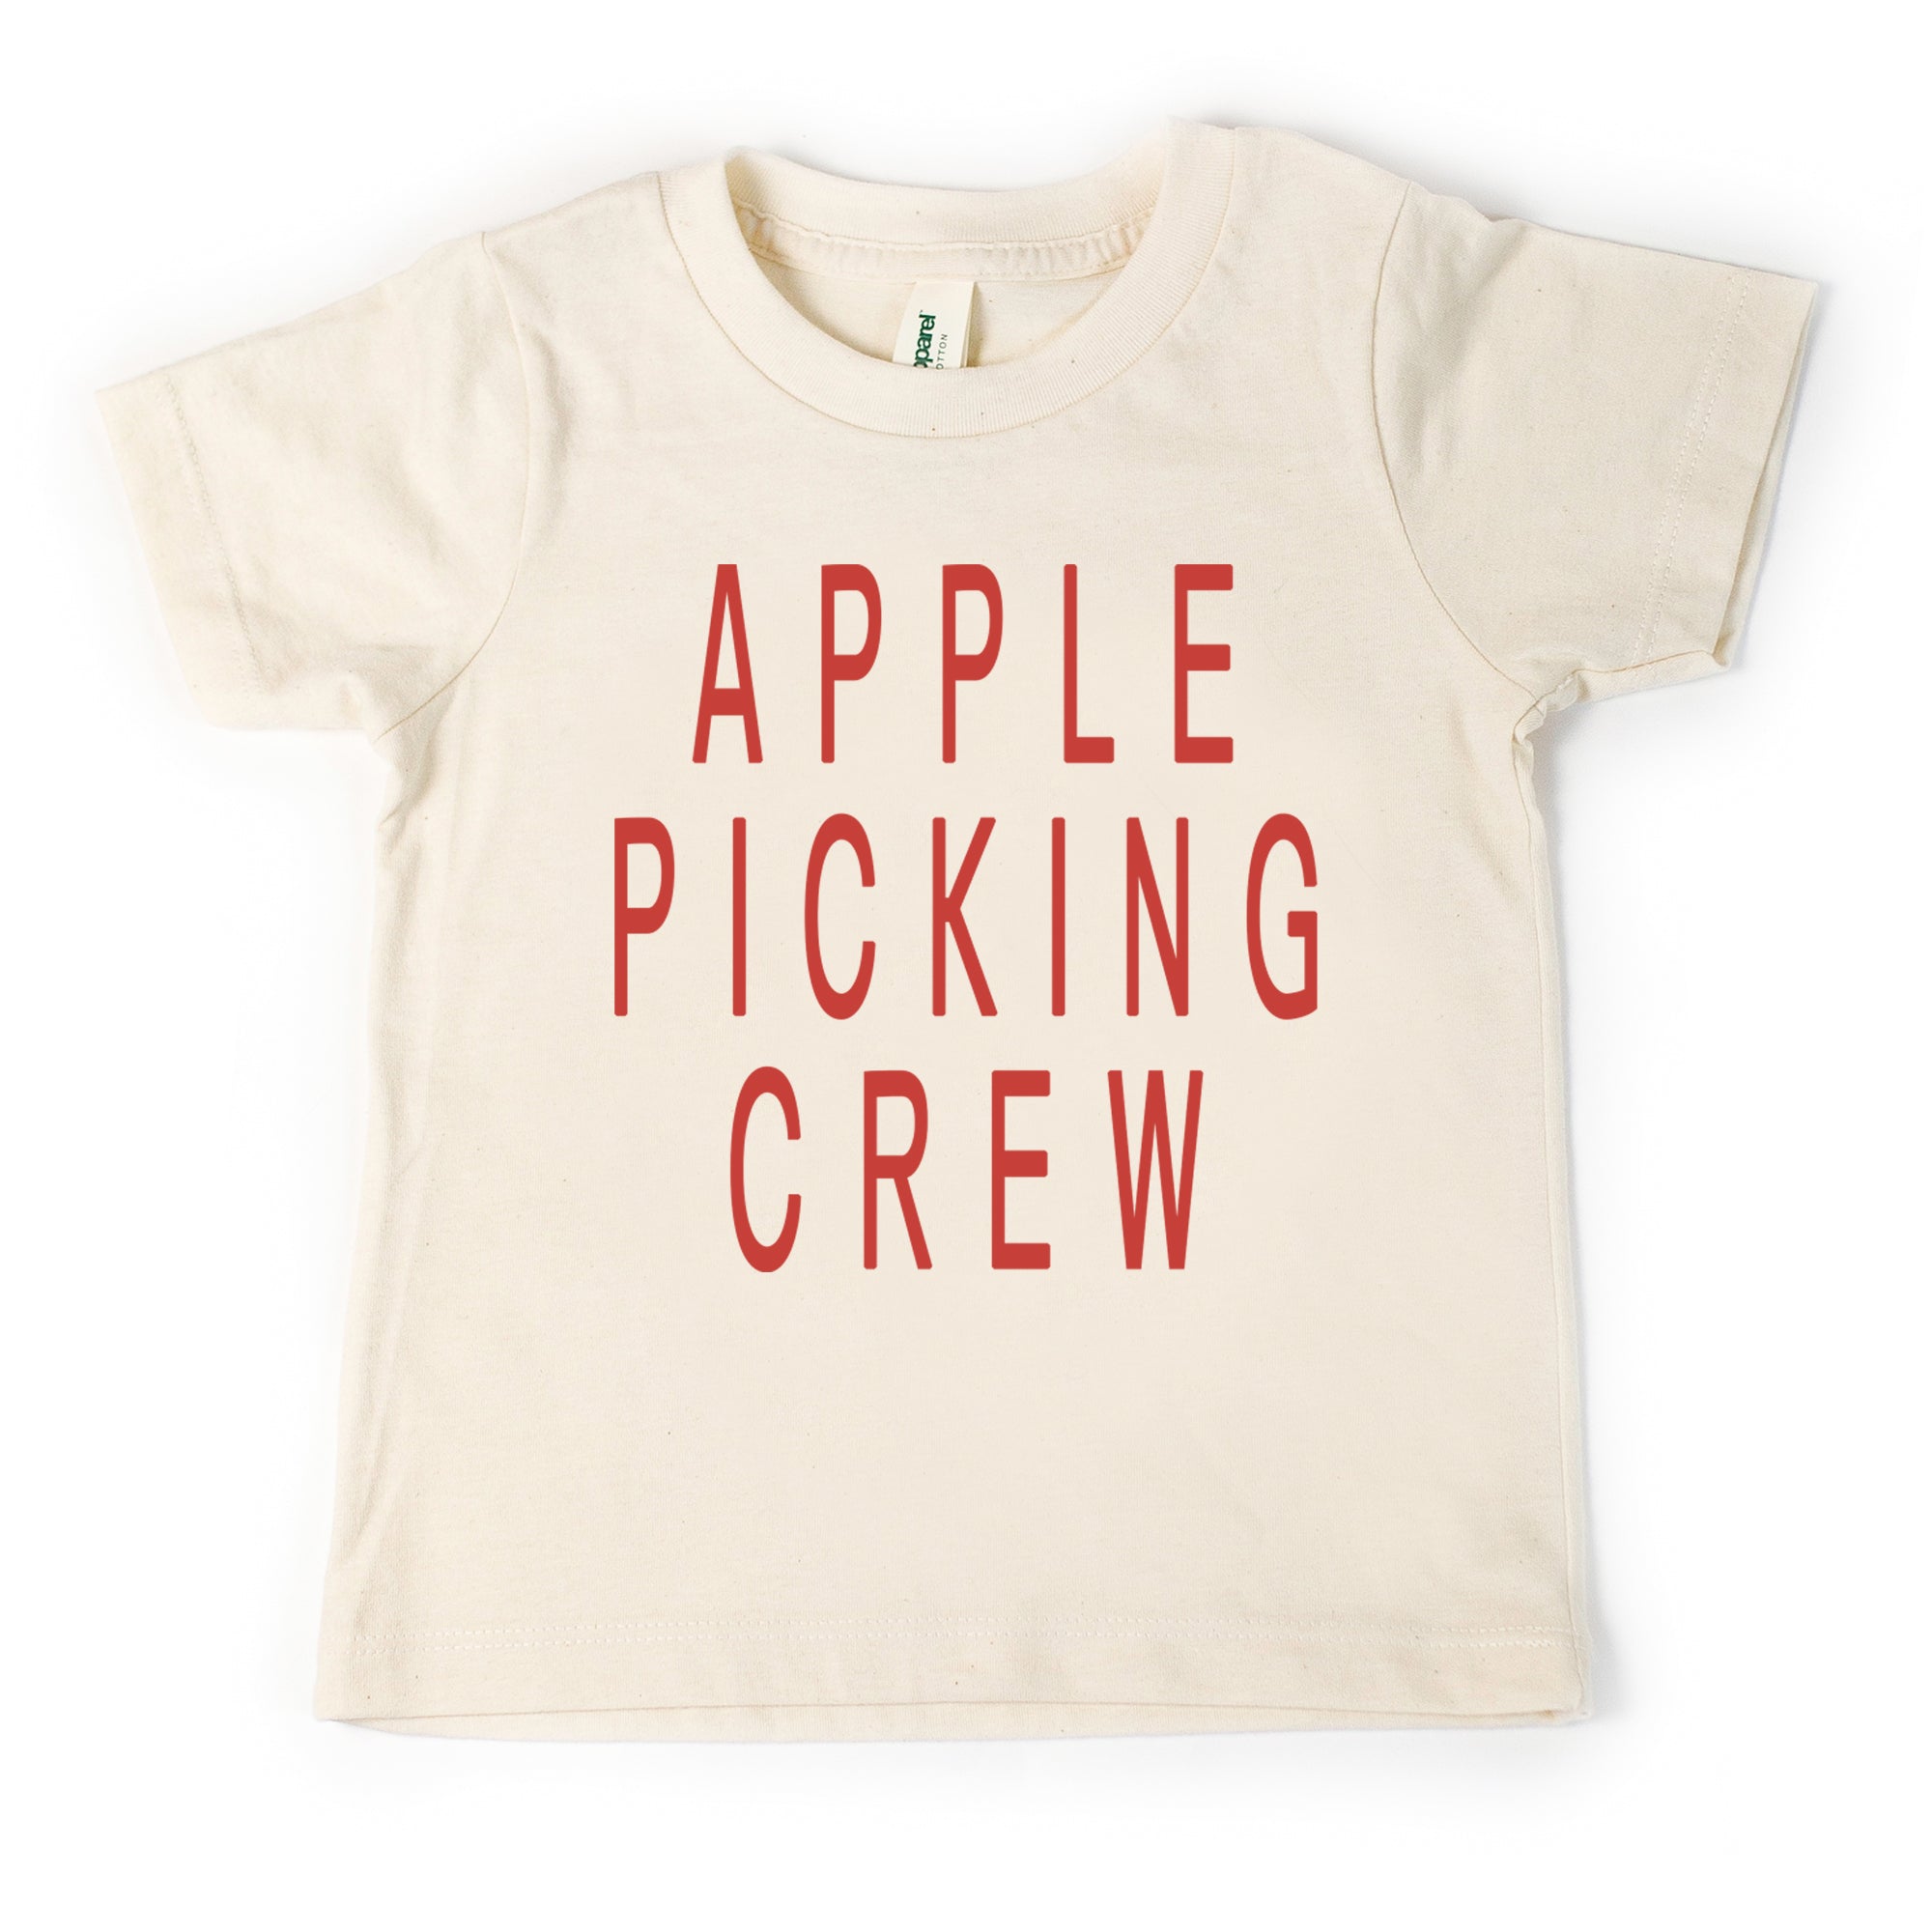 Apple Picking Crew, natural tshirt, toddler, youth and adult